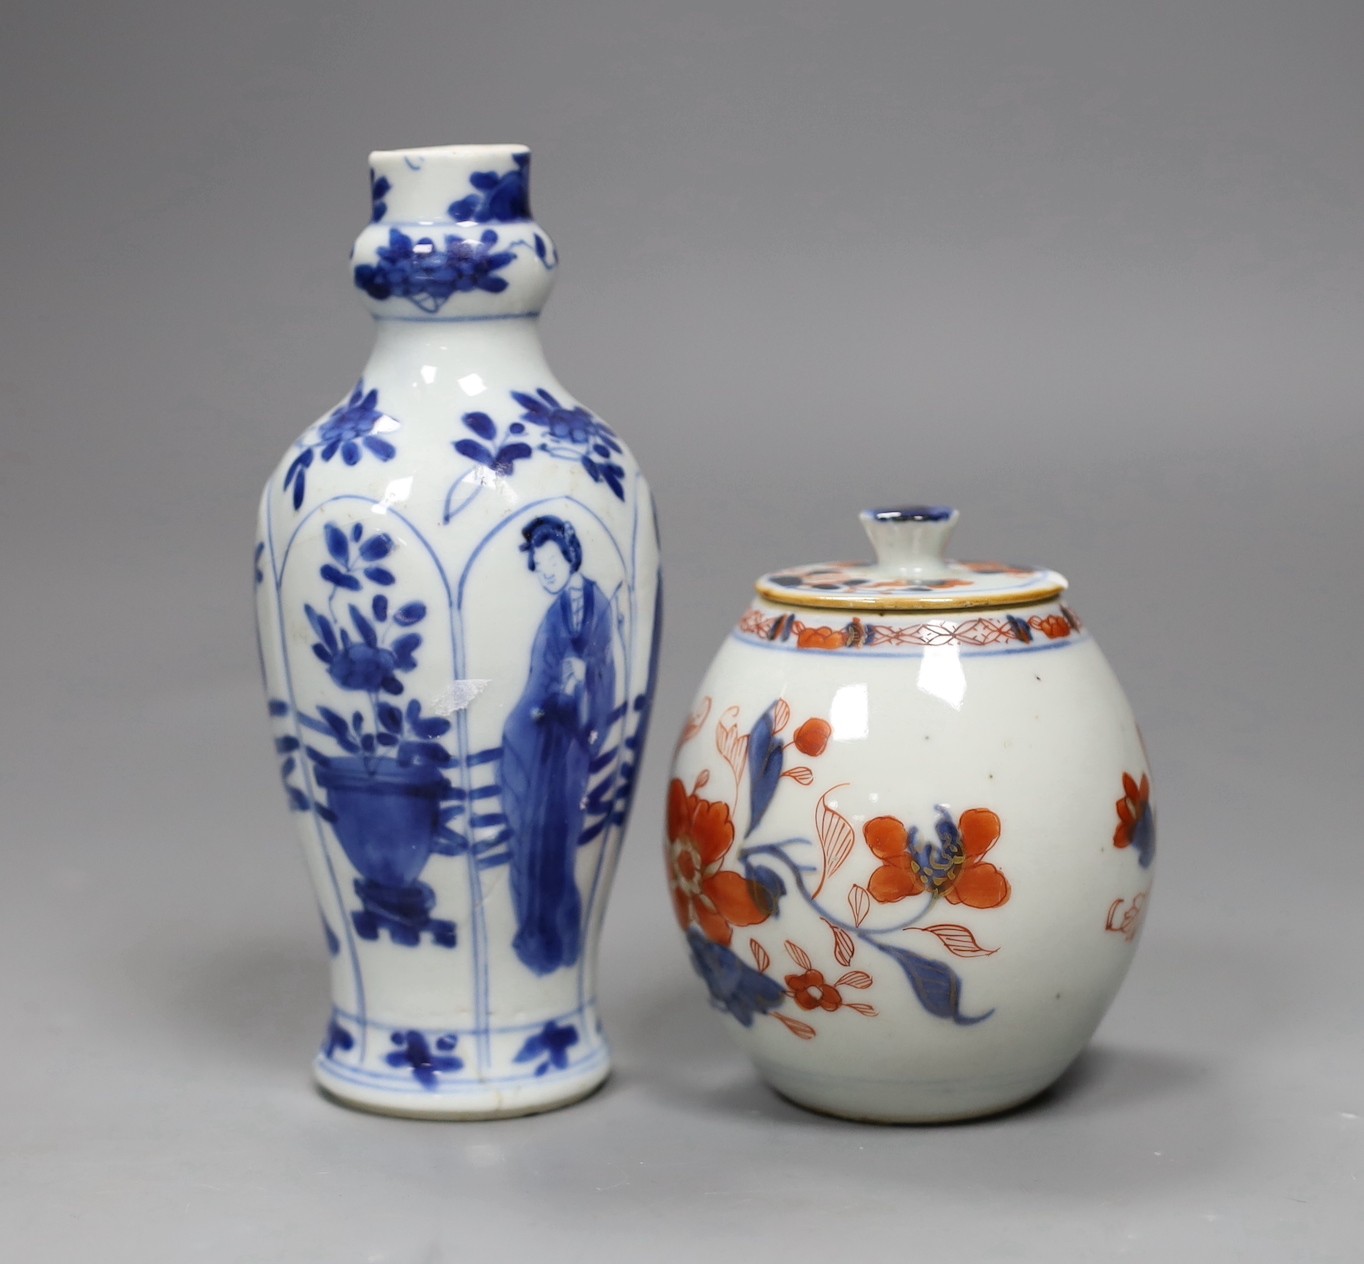 A Chinese Kangxi blue and white small vase, 15cm tall, and an 18th century Chinese Imari pot and cover